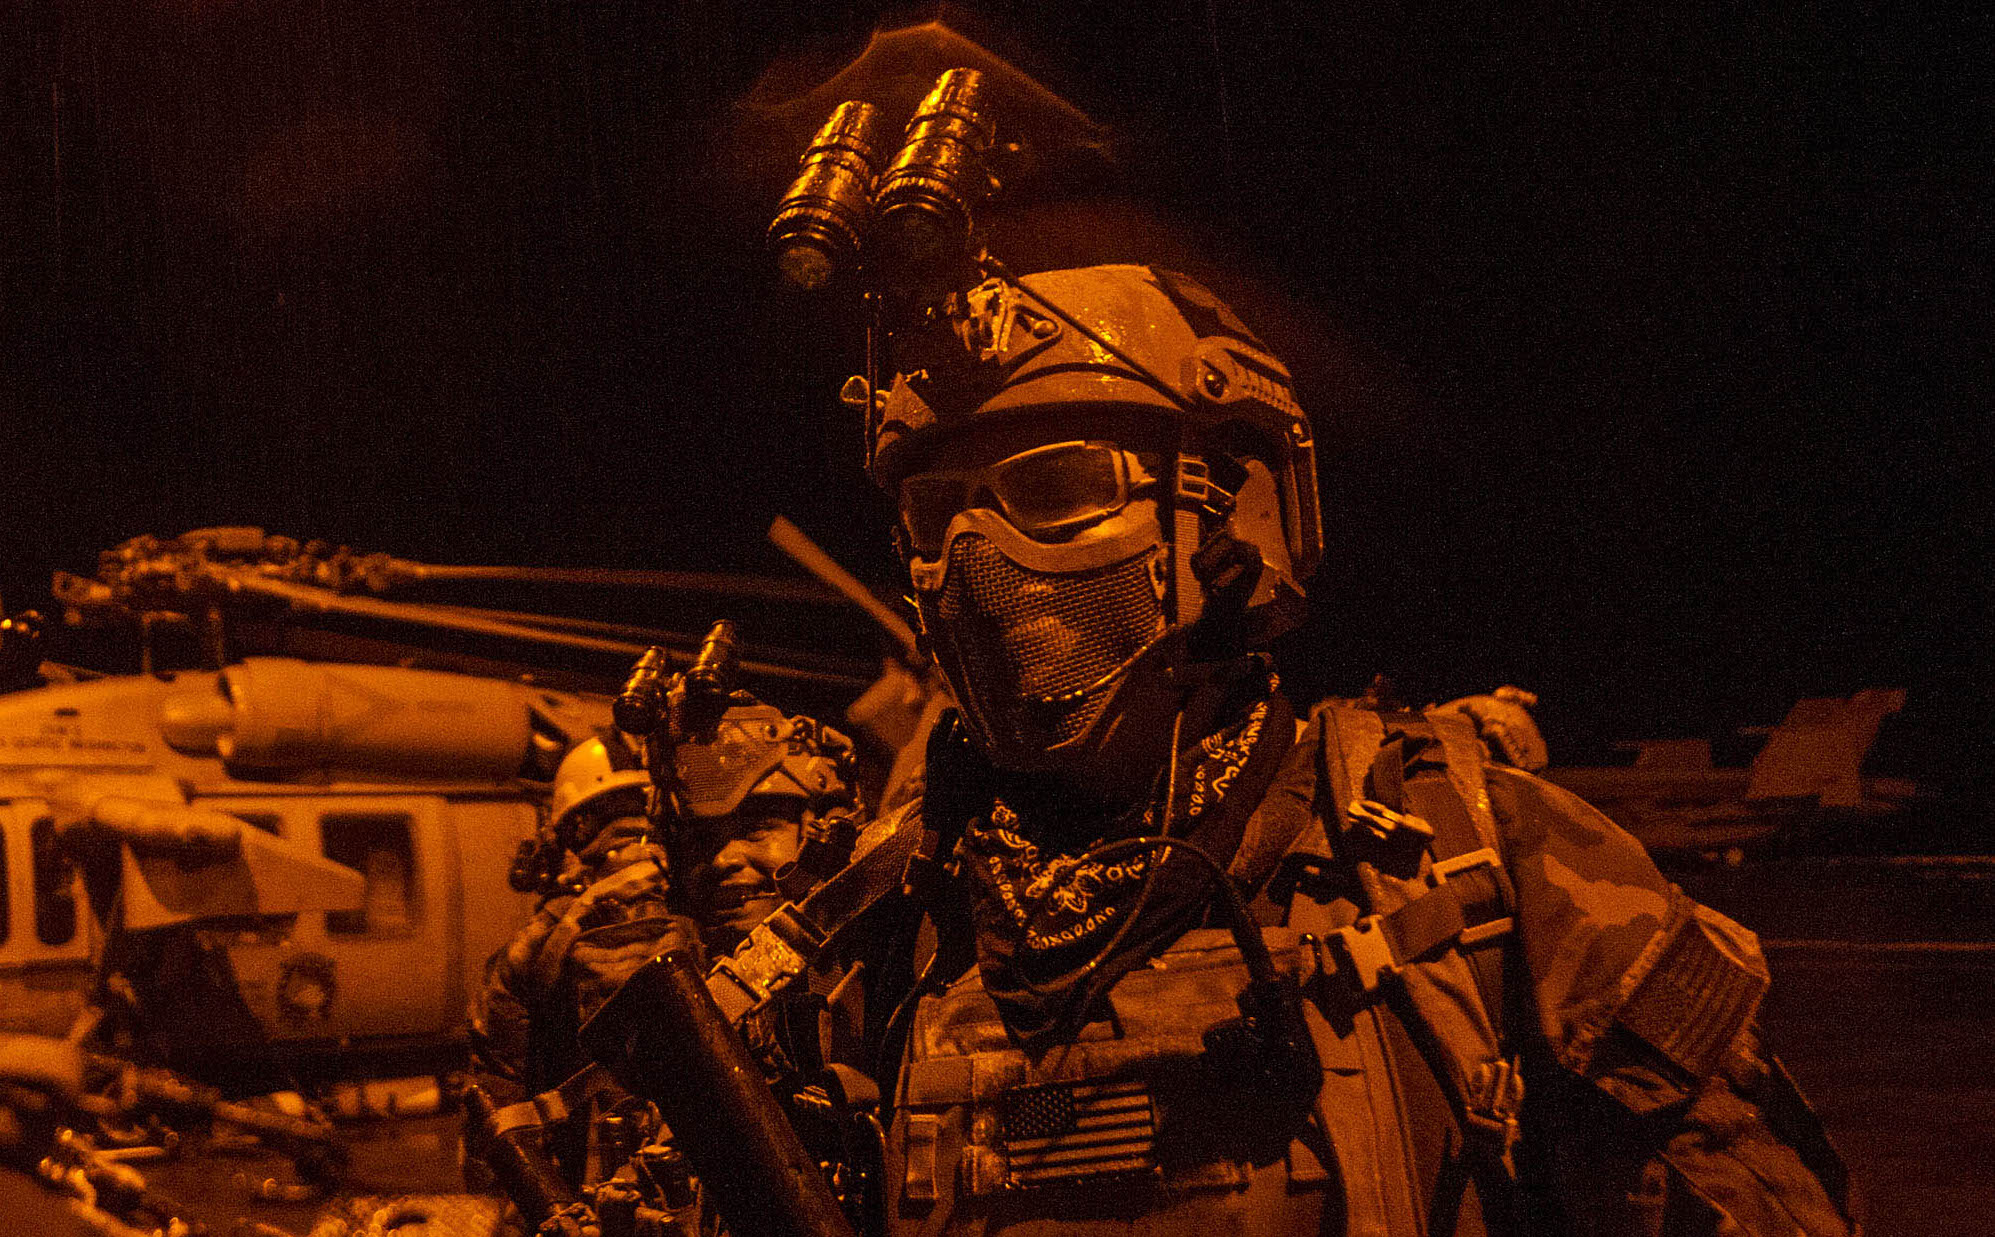 Maritime special operations forces prepare for a mission during a training exercise aboard USS George Washington (CVN-73) on Sept. 28, 2014. US Navy Photo